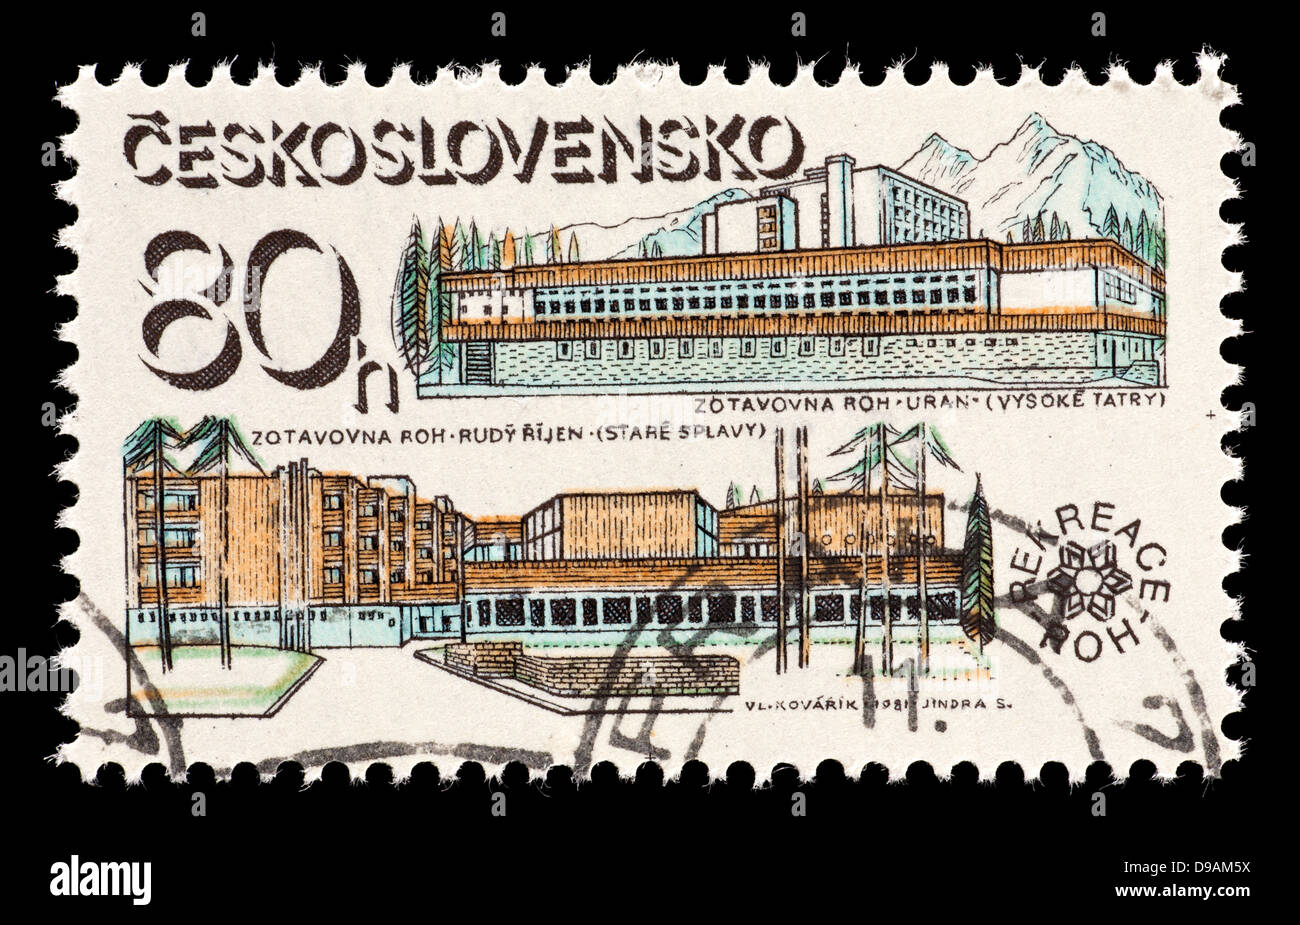 Postage stamp from Czechoslovakia depicting Uran an Red October hotels. Stock Photo